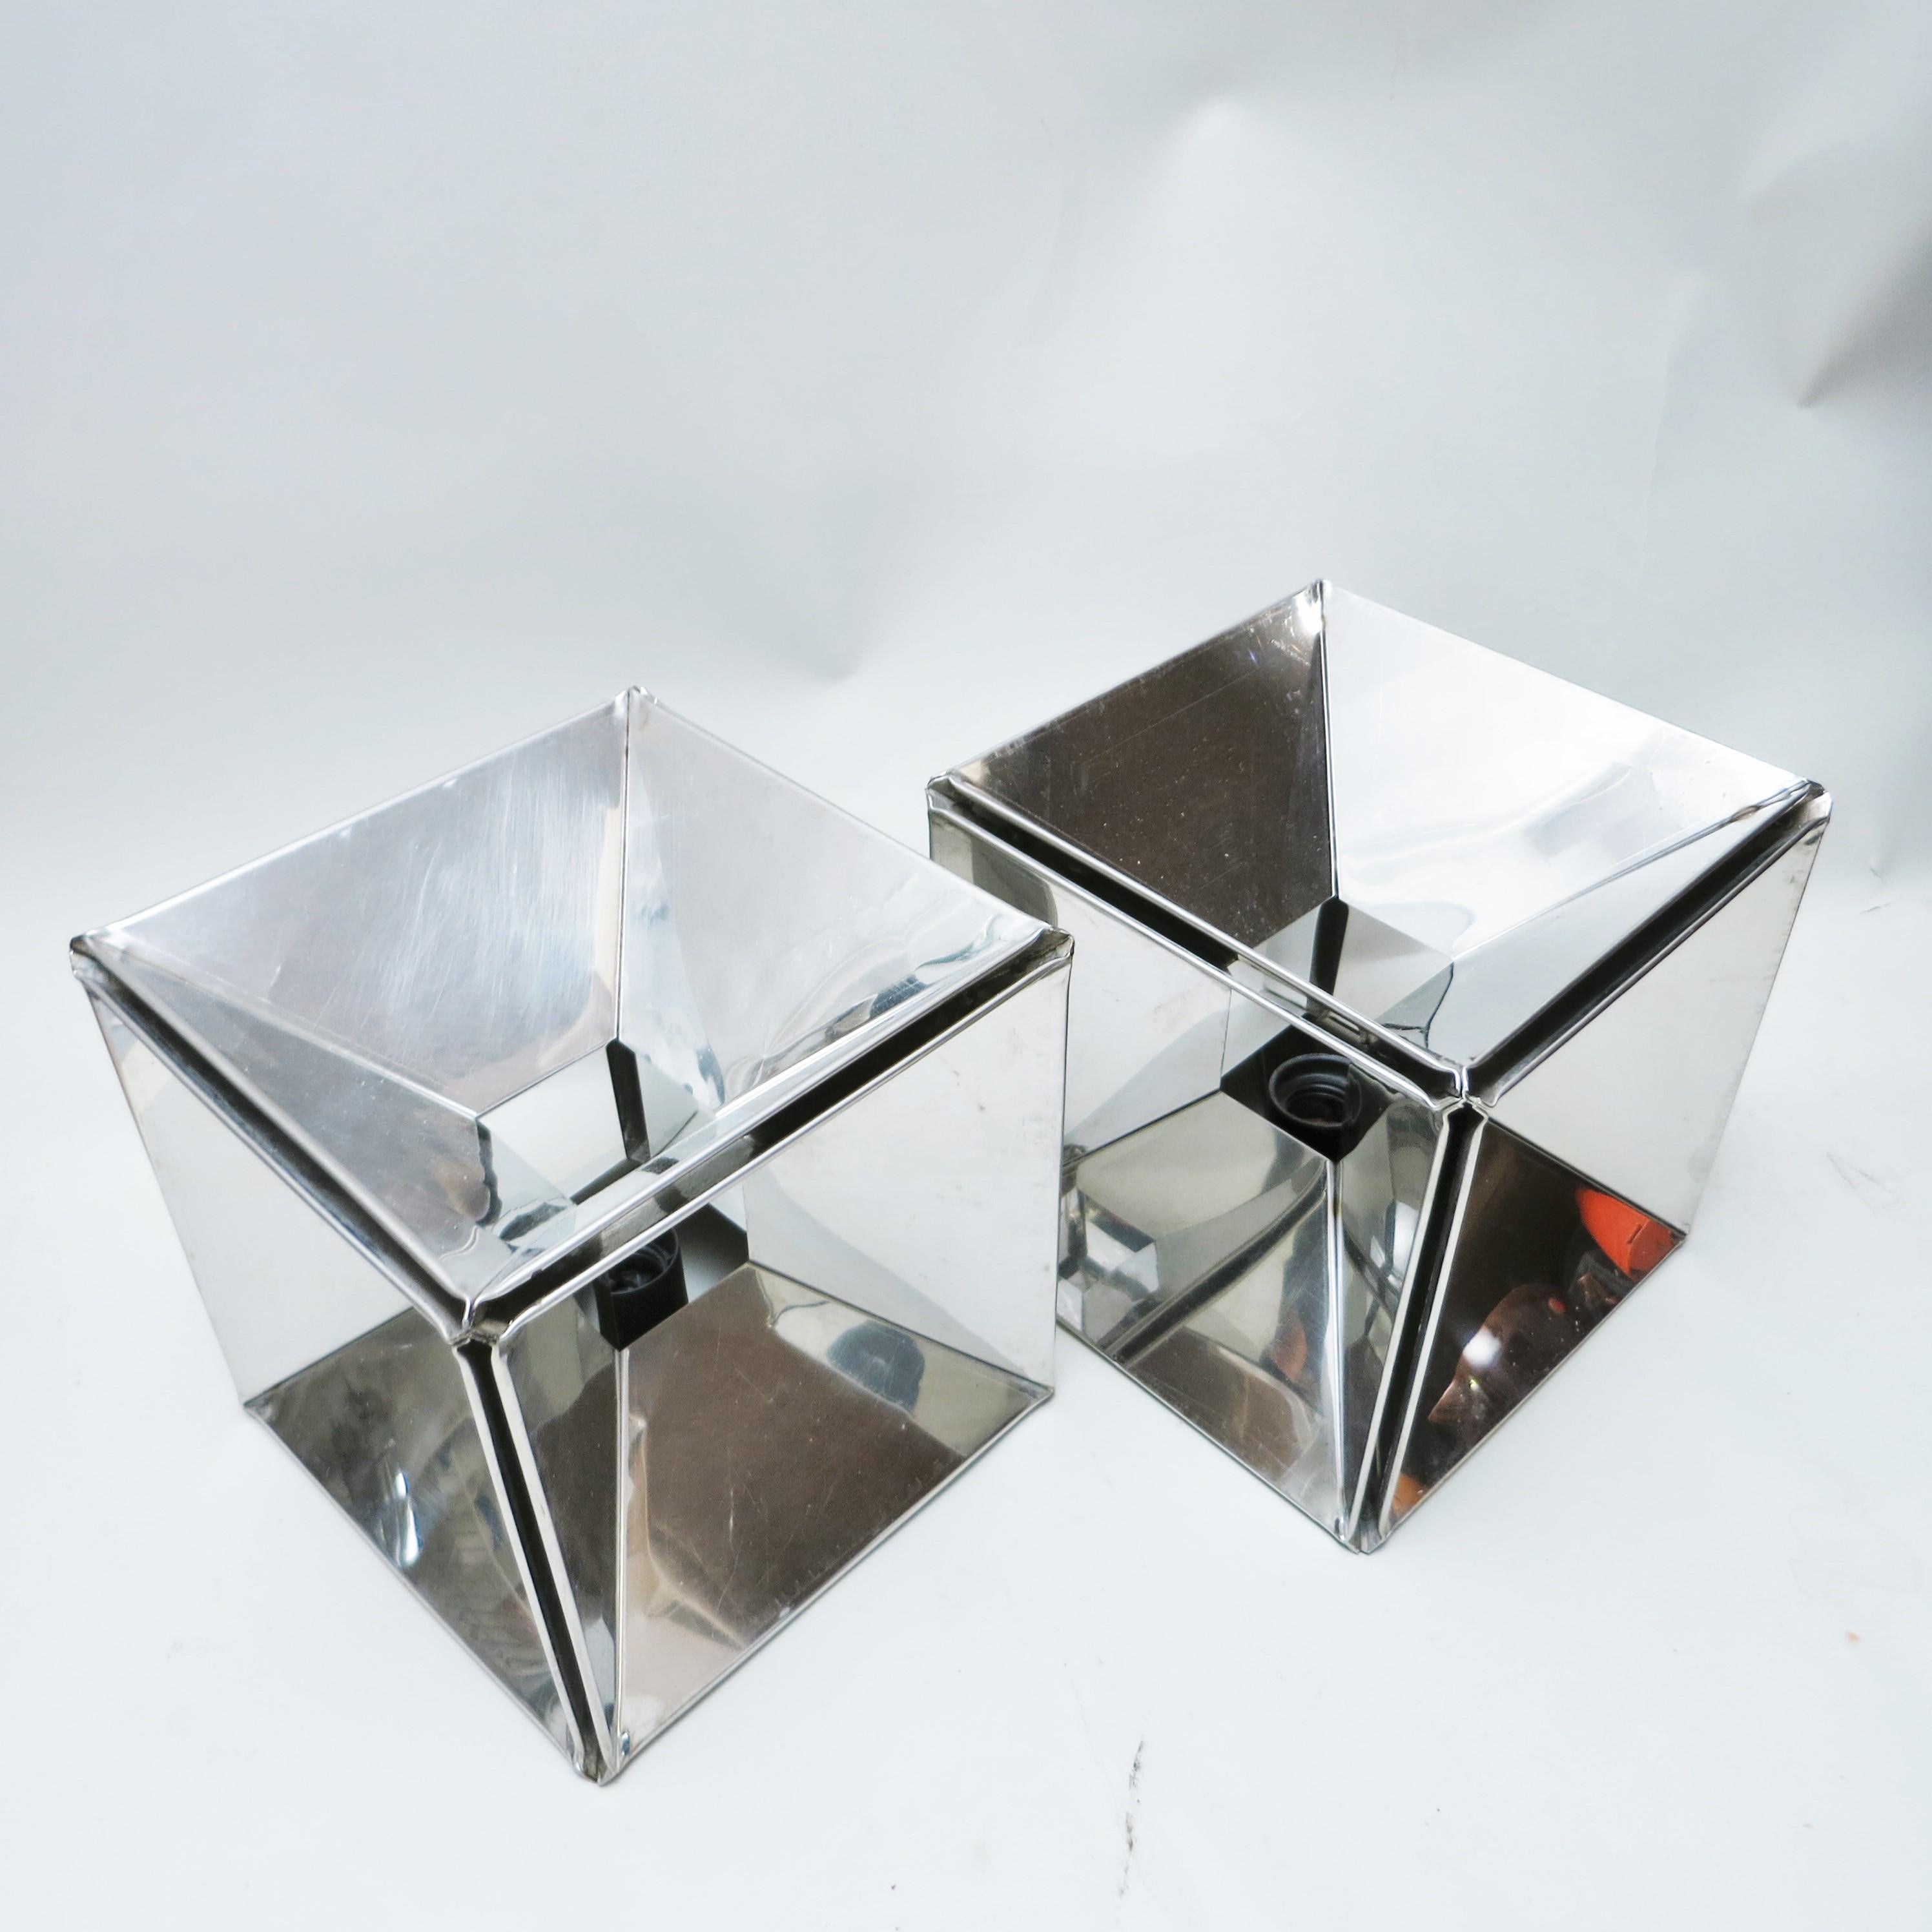 Pair of Kinetic cube lamps, Italian work of the 1970s in mirror chrome folded metal sheets.
These lamps can be used as desk lamp, wall lamps or ceiling lamps.